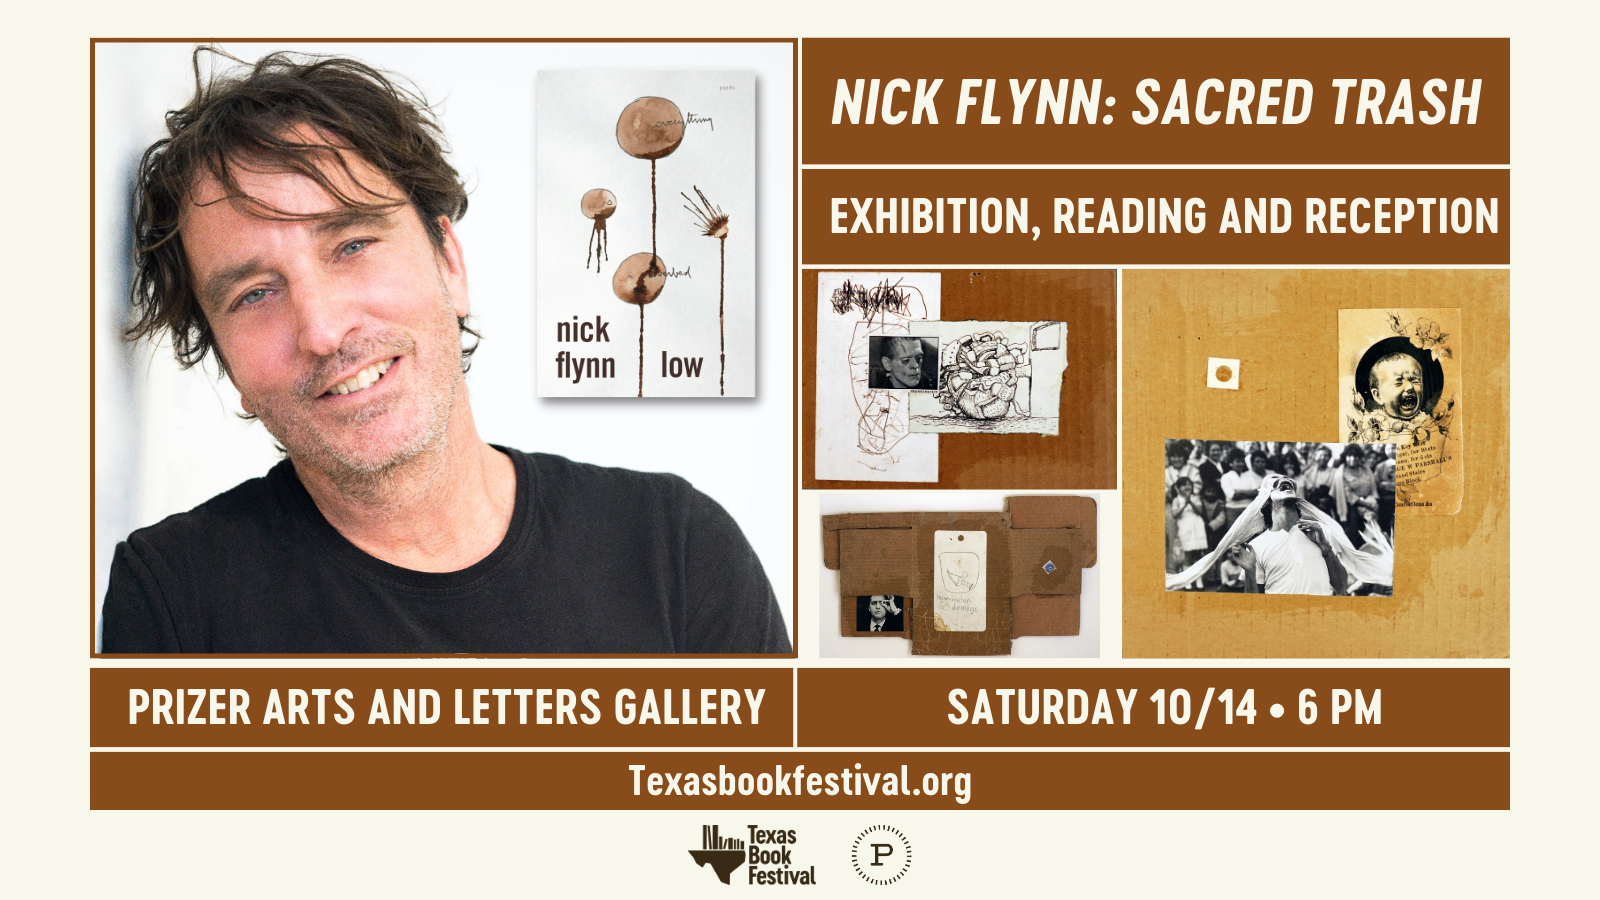 Exhibition, Reading and Reception for Nick Flynn: Sacred Trash